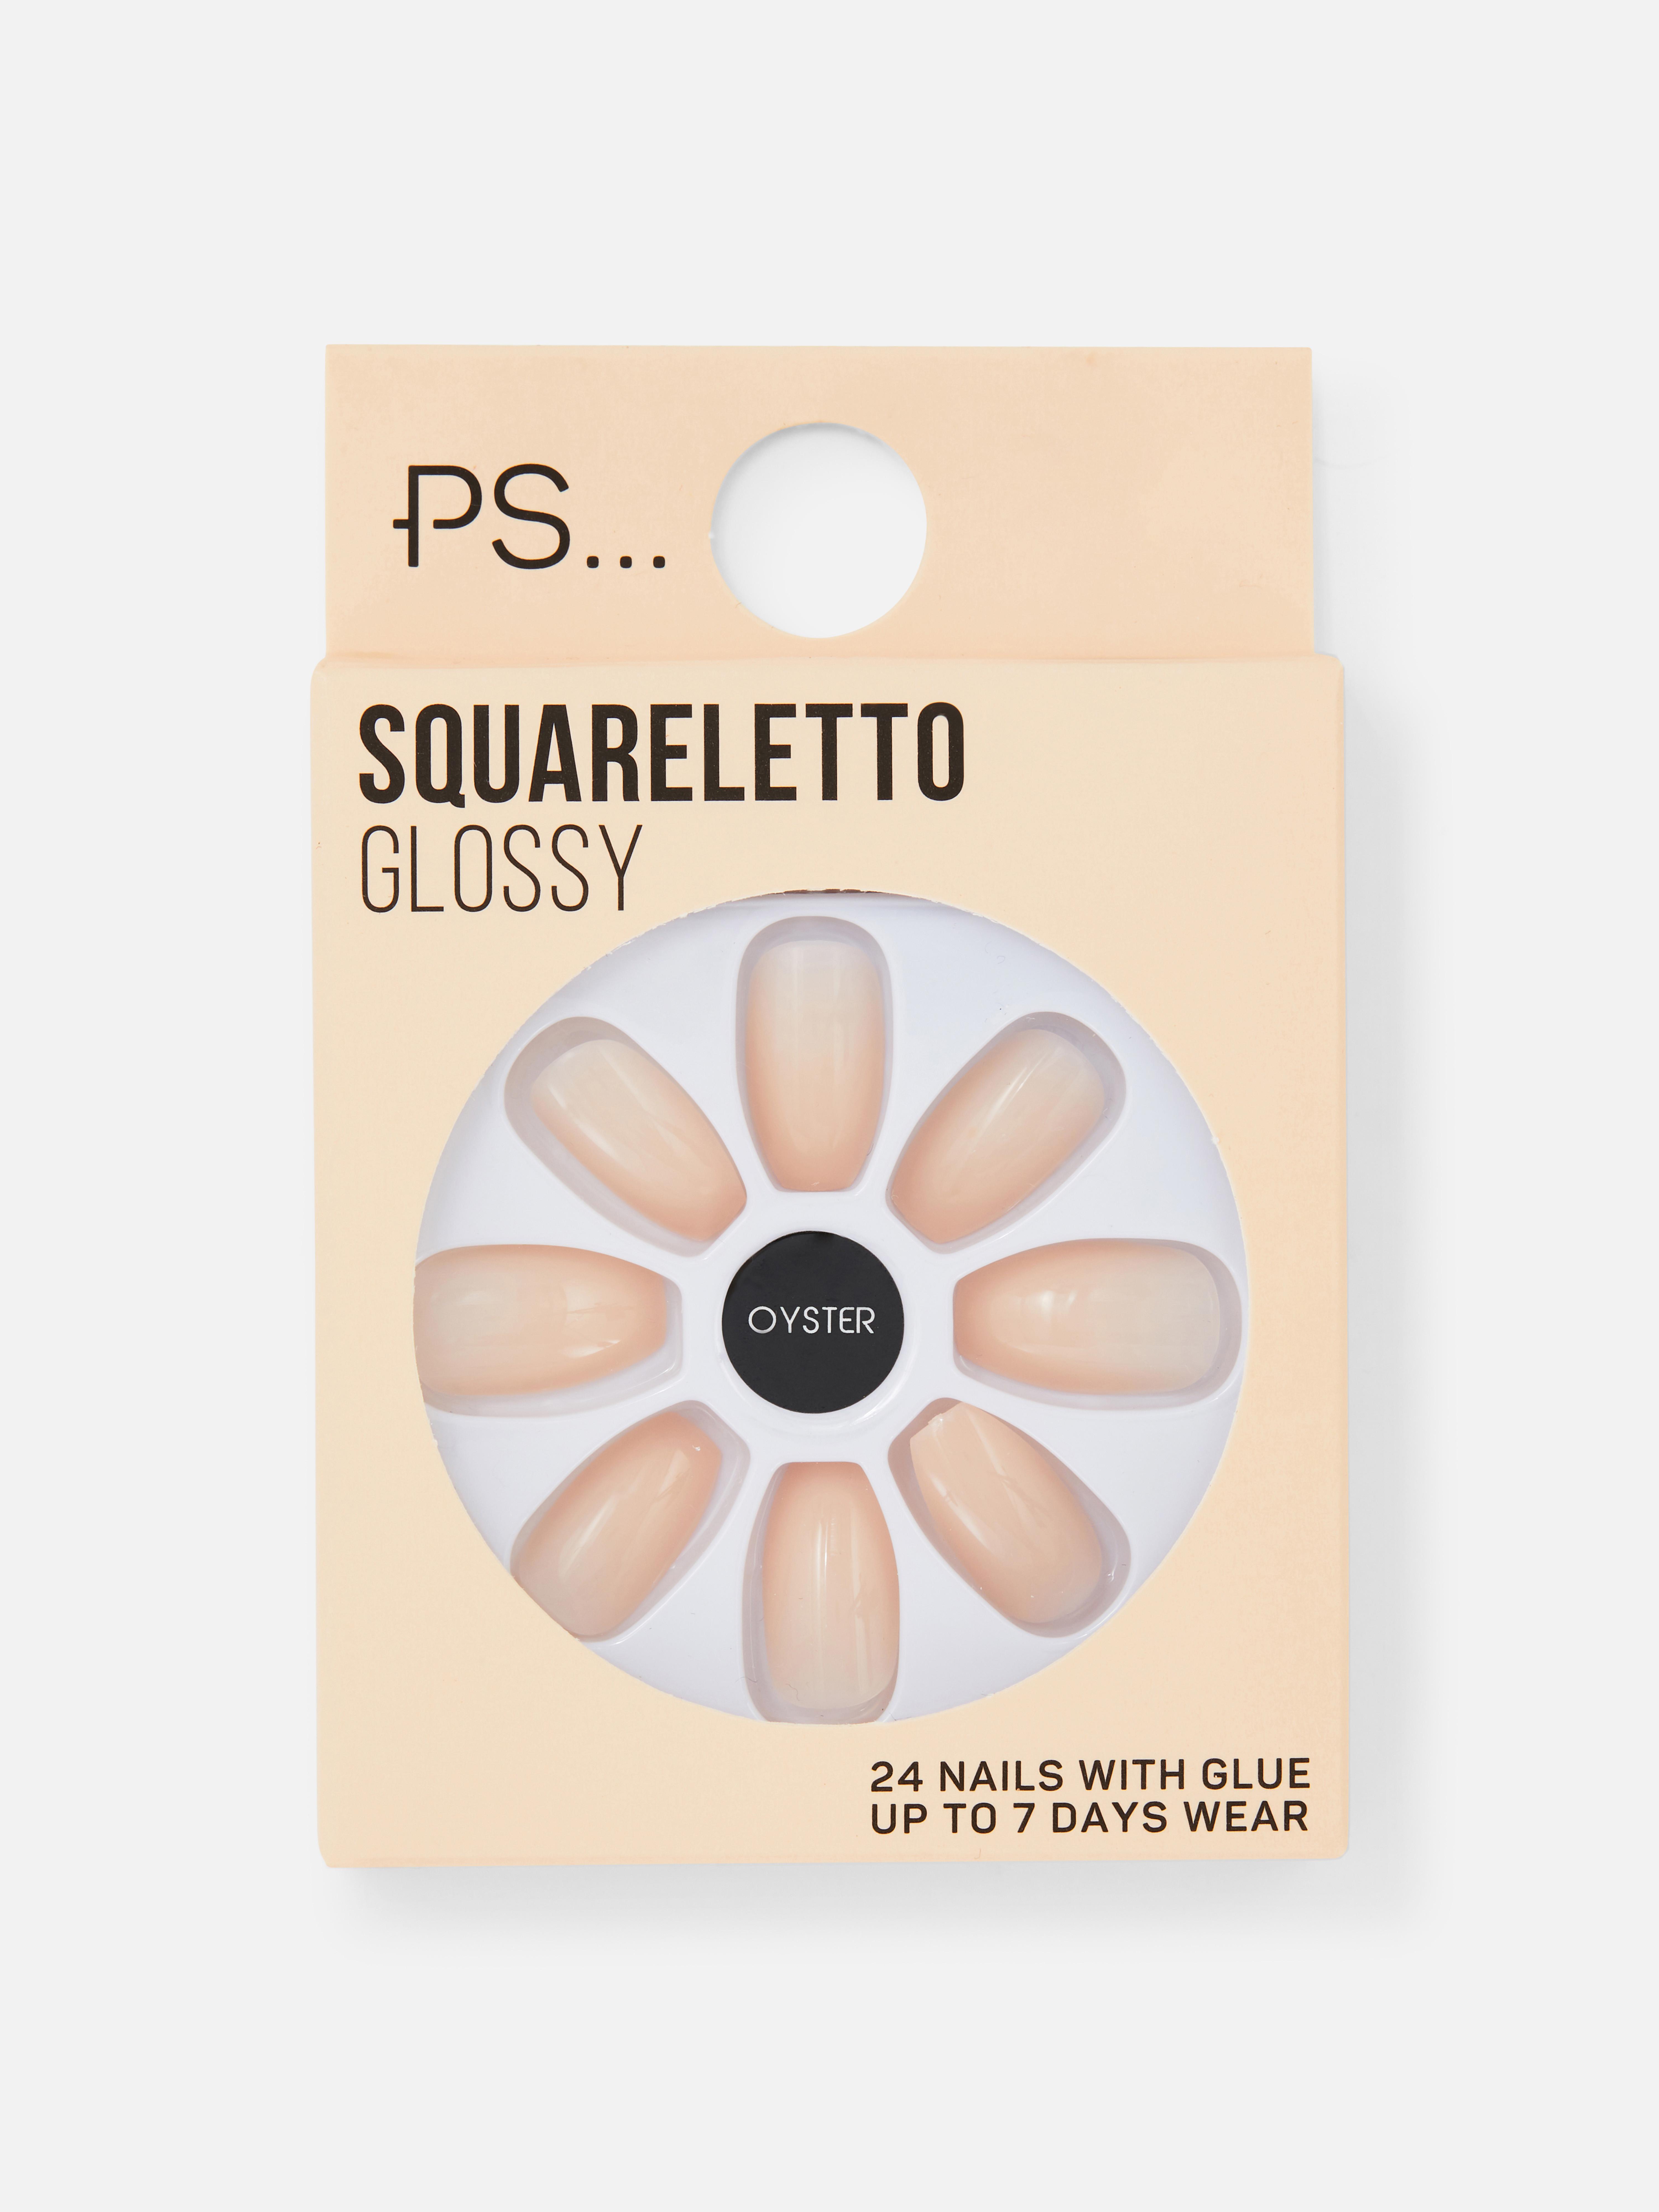 PS… Squareletto Glossy False Nails Oyster